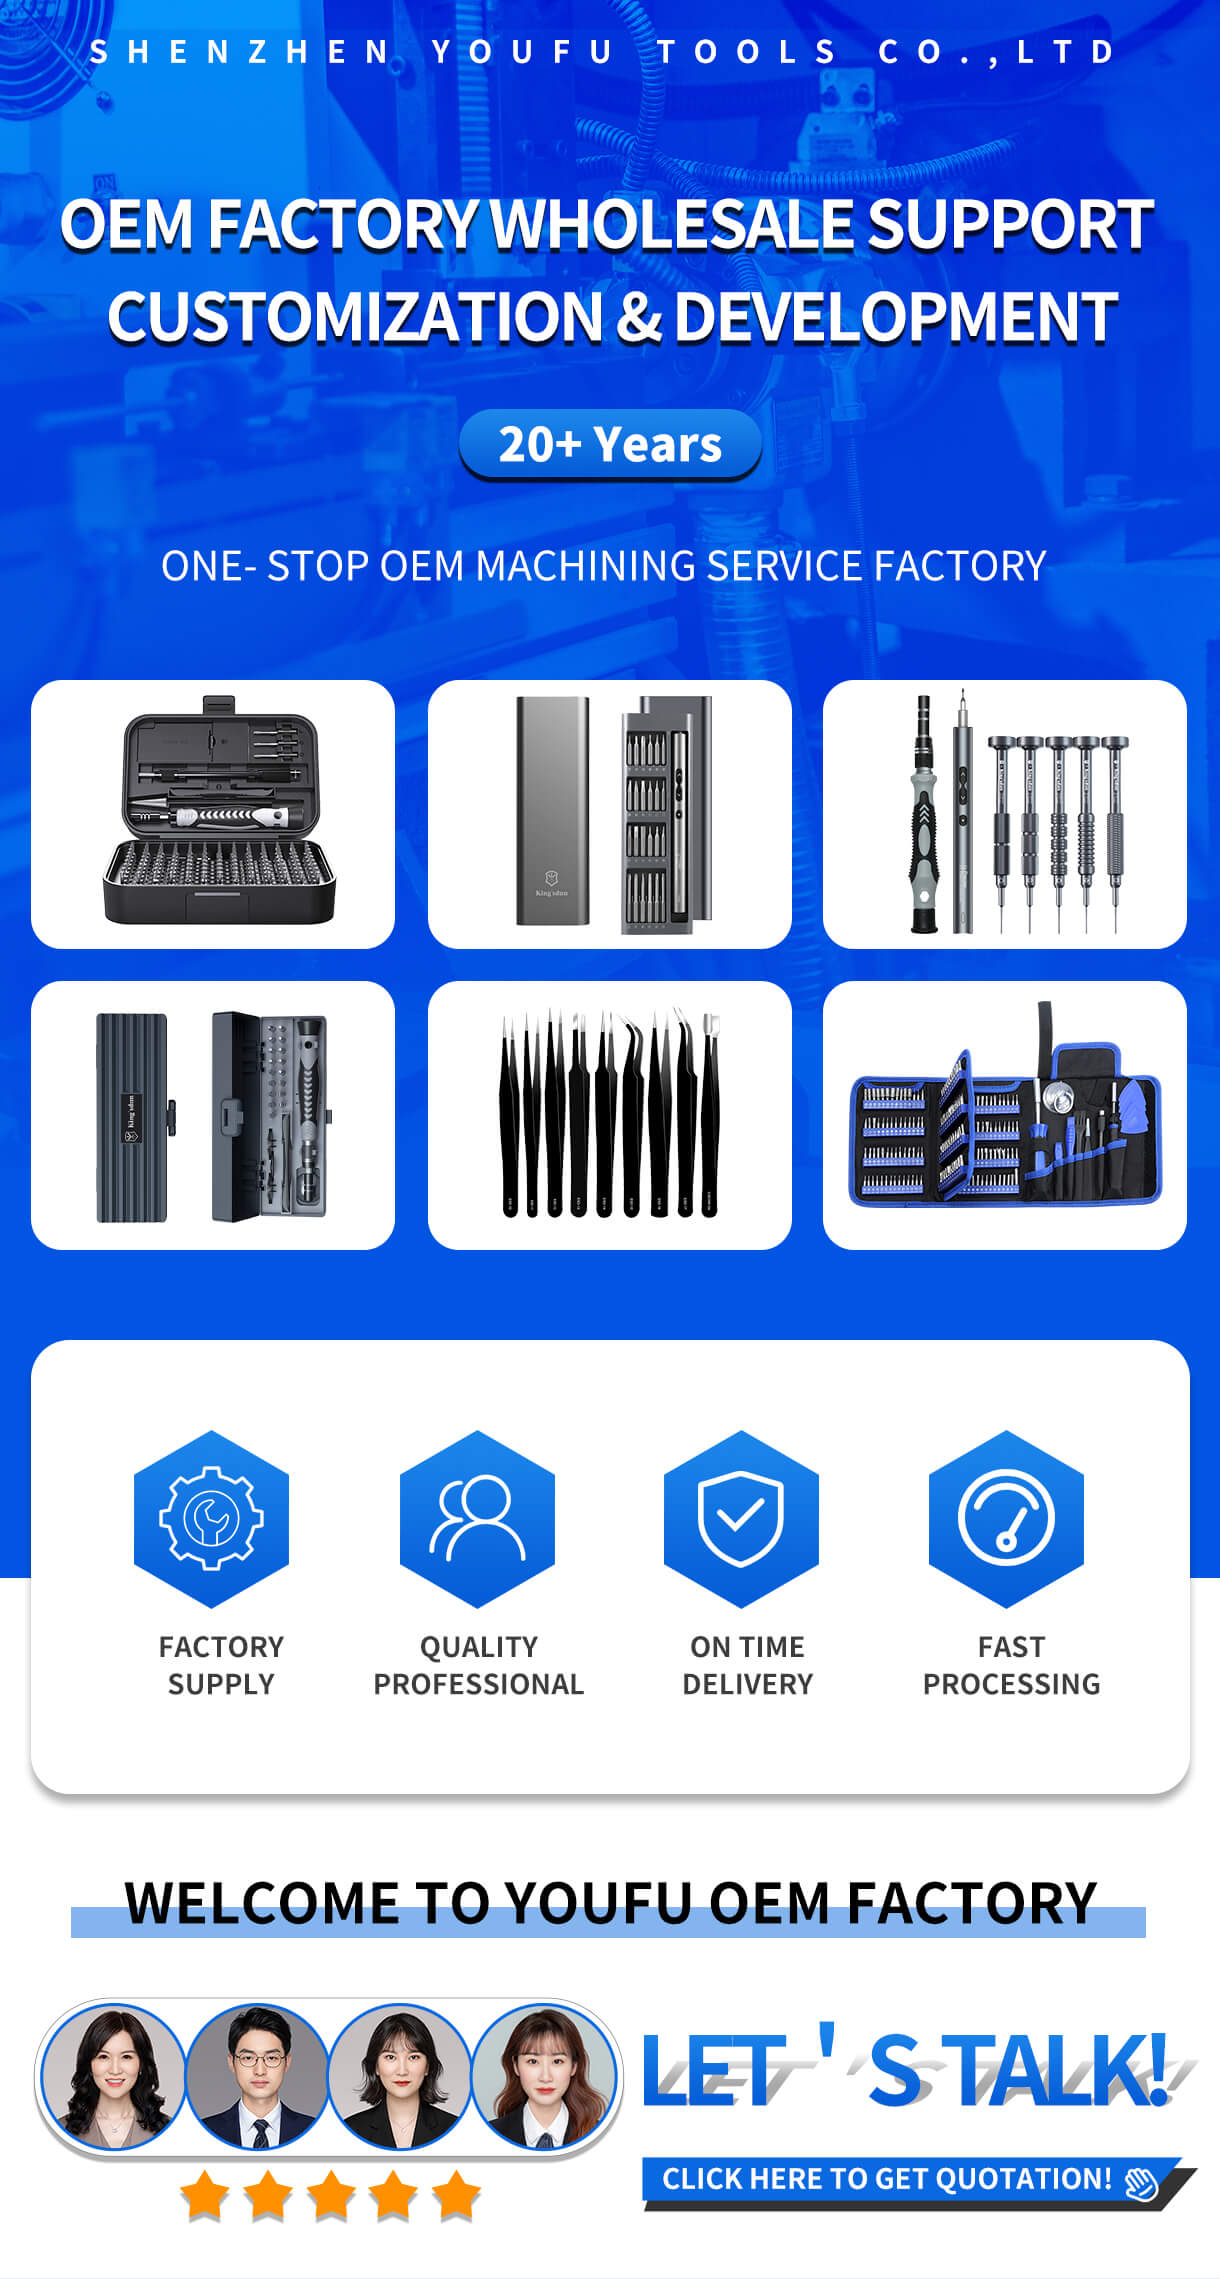 Looking for Screwdriver Set Manufacturers or Repair Tools Kit Wholesalers? YouFu is One of the Best Screwdriver Set Suppliers.